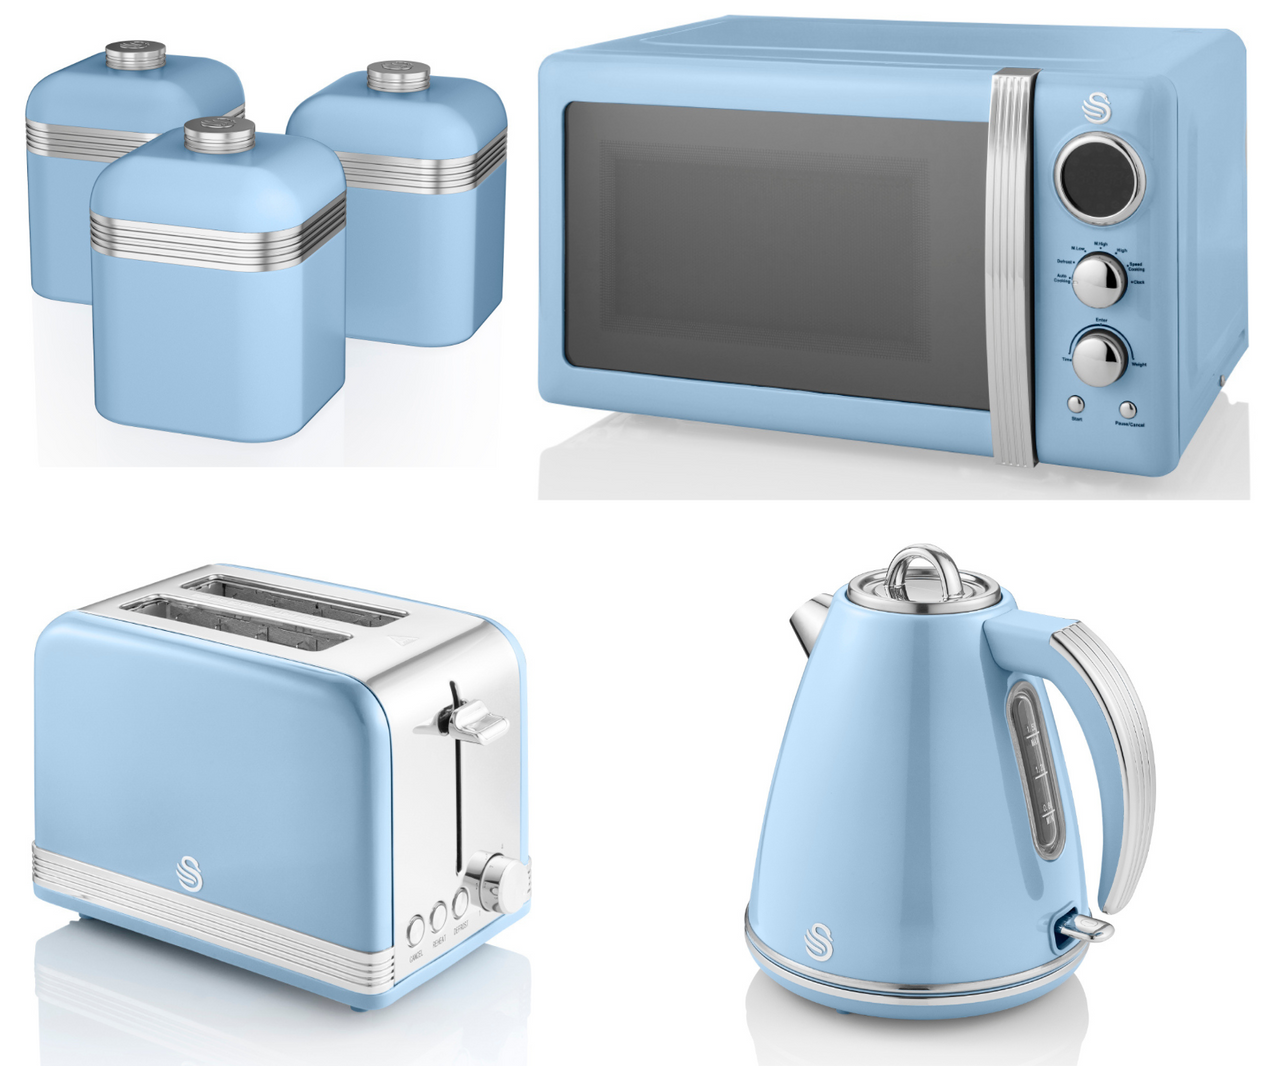 SWAN Retro Blue 1.5L 3KW Jug Kettle, 2 Slice Toaster, 800W 20L Microwave & 3 Canisters Matching Kitchen Set